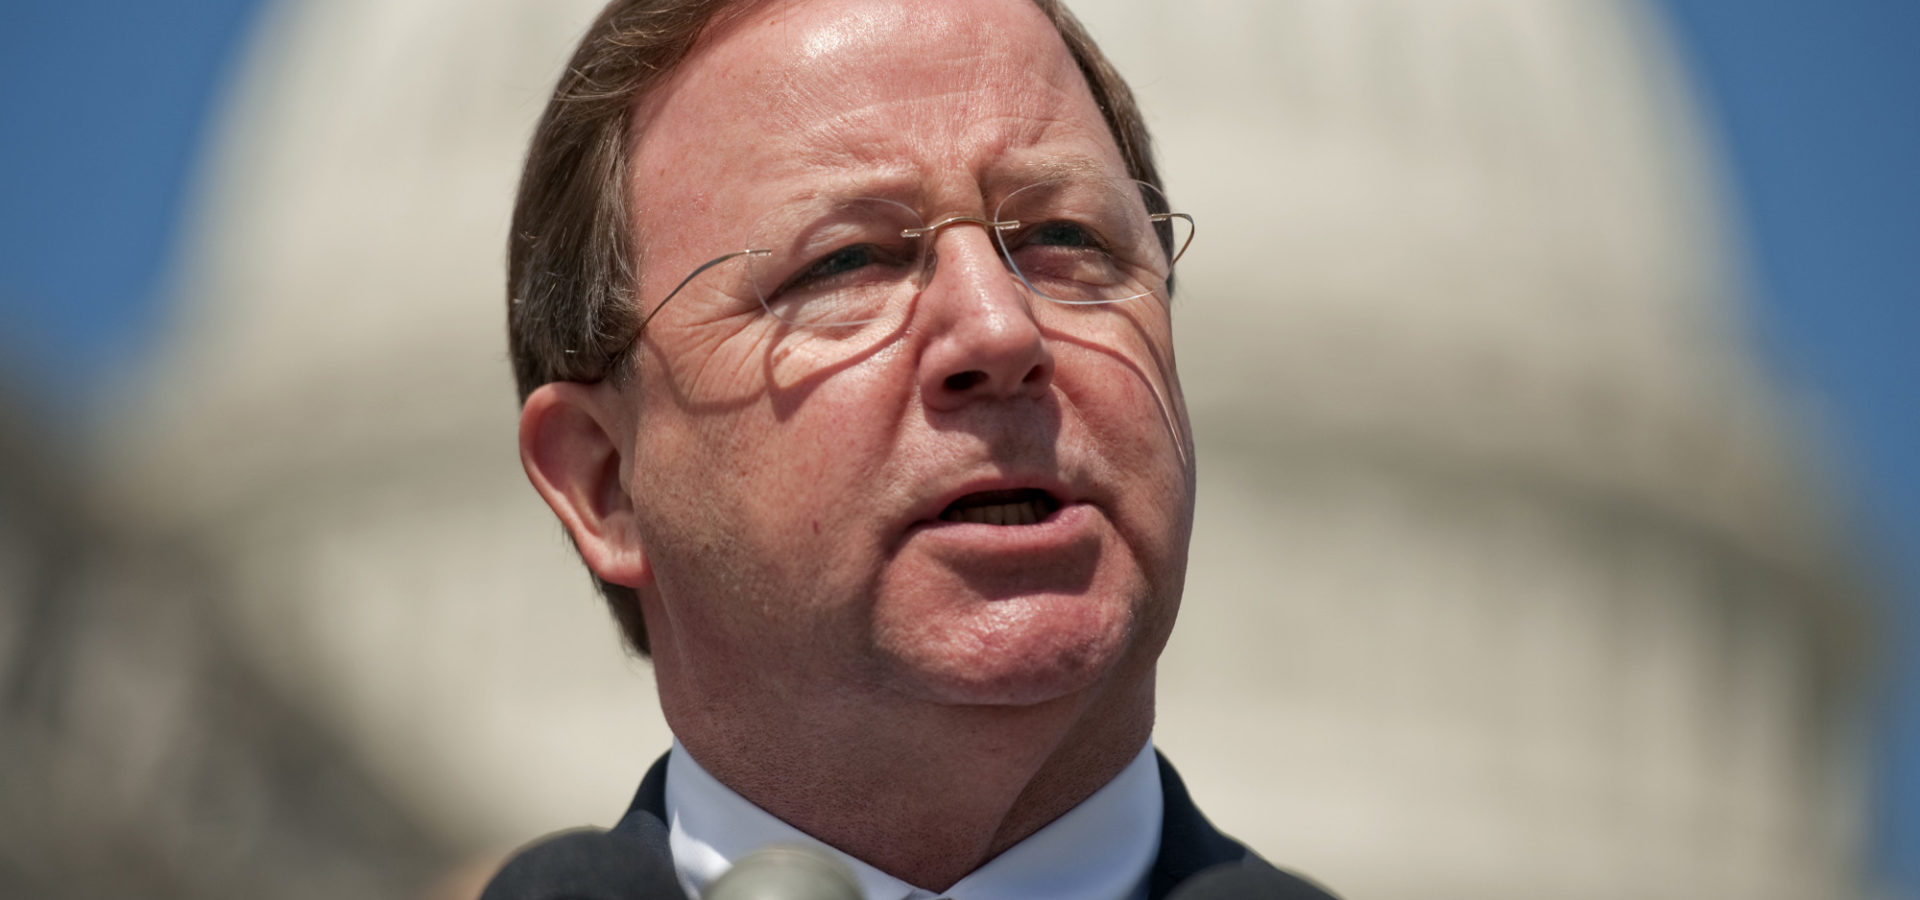 Rep. Bill Flores, R-Texas, speaks at a news conference. (AP Photo)